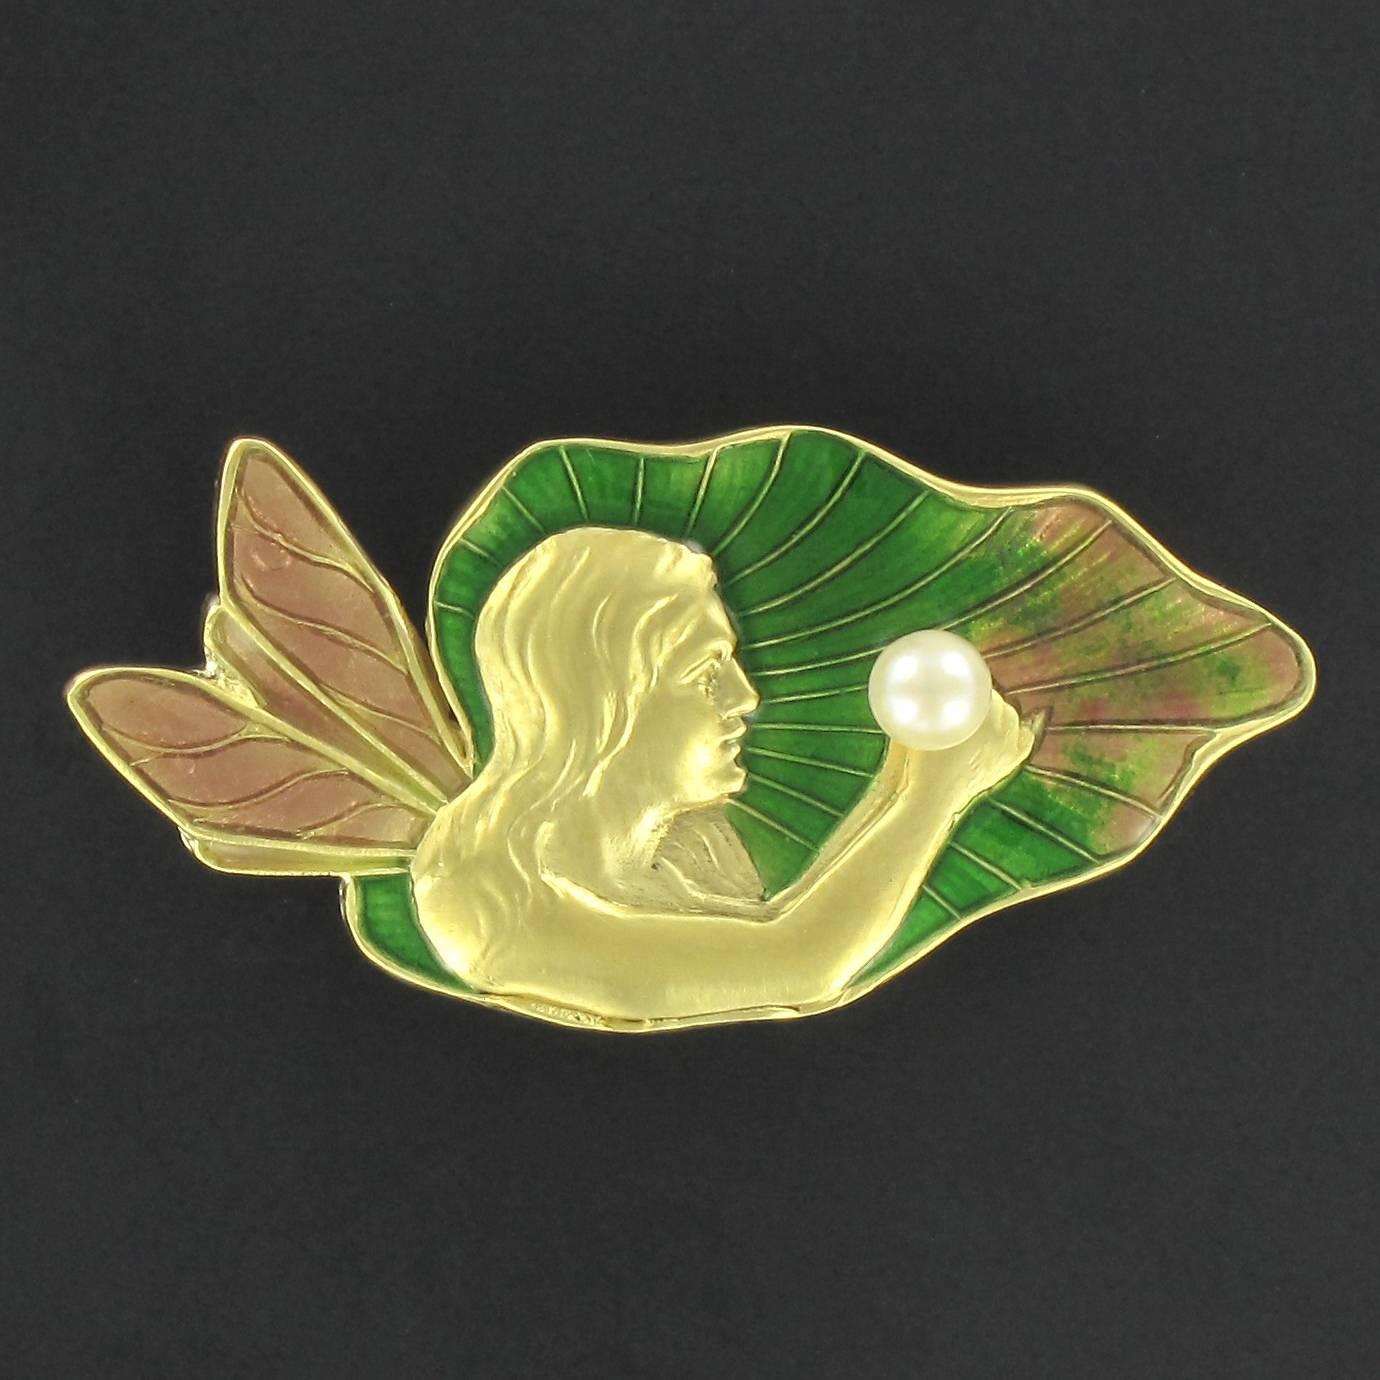 18 carat yellow gold brooch, eagle head hallmark. 

This splendid gold Art Nouveau style brooch displays the face and bust of a fairy with loose hair and unfolded wings holding a cultured round oriental white pearl in her hands. Apart from the fairy